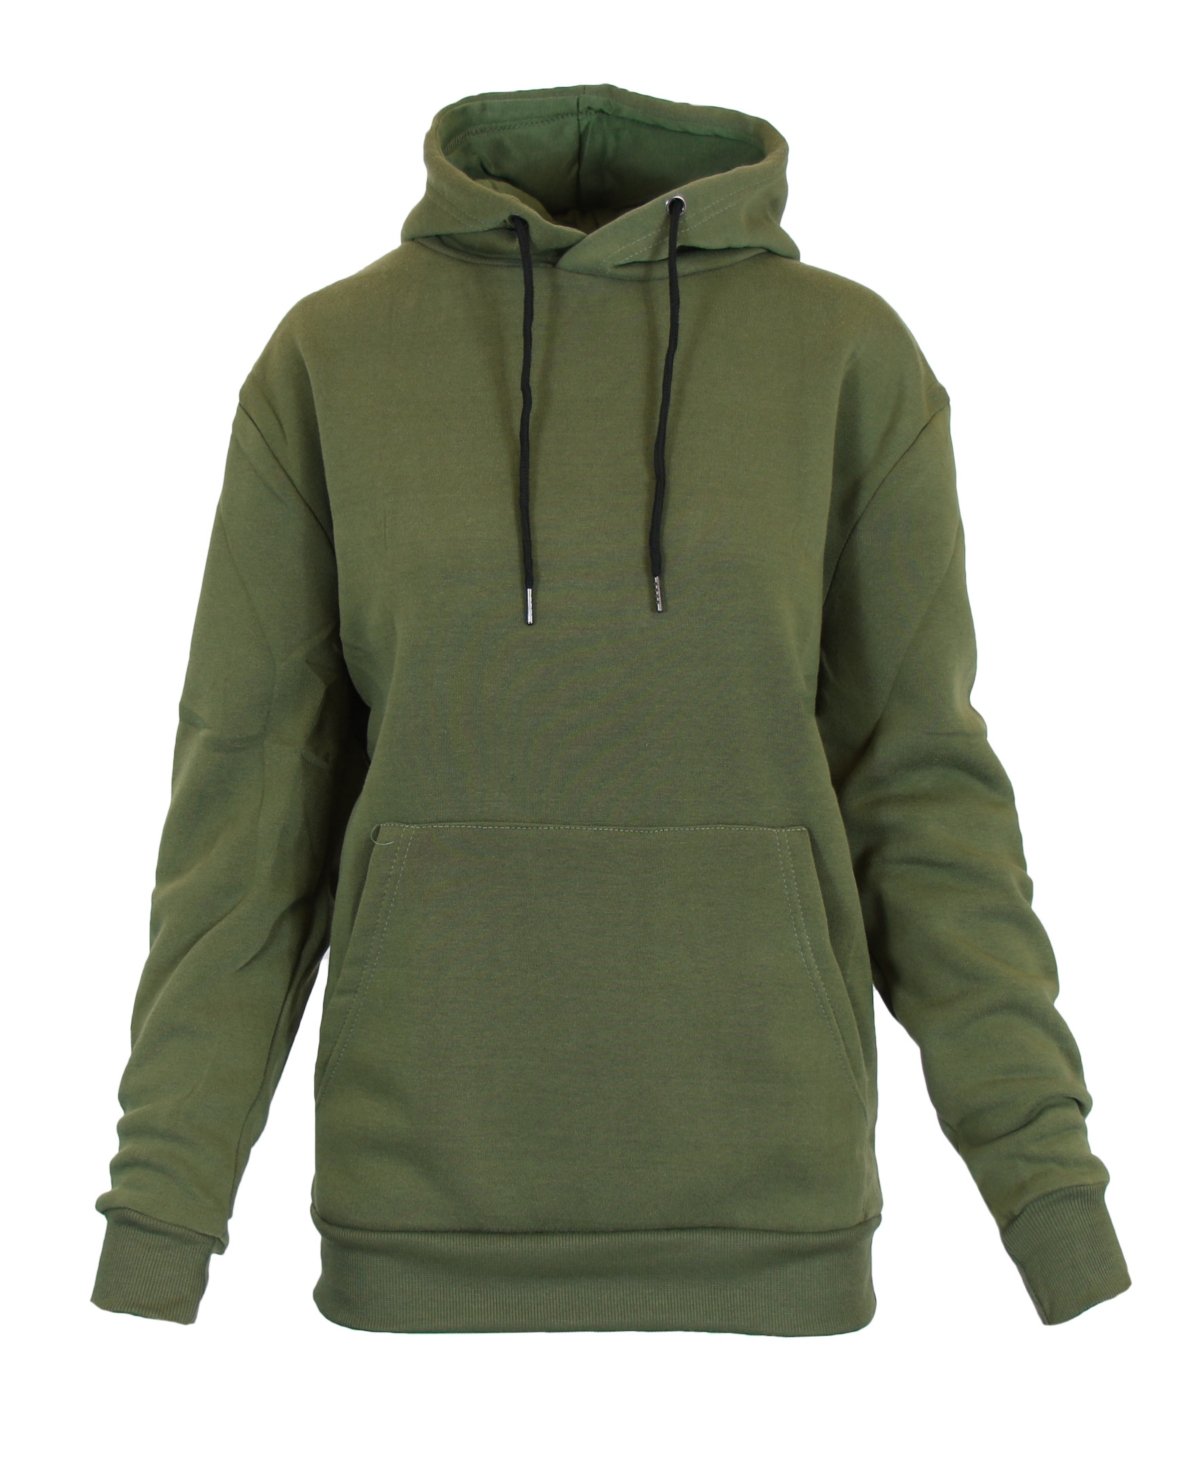 Women's Heavyweight Loose Fit Fleece Lined Pullover Hoodie - Olive